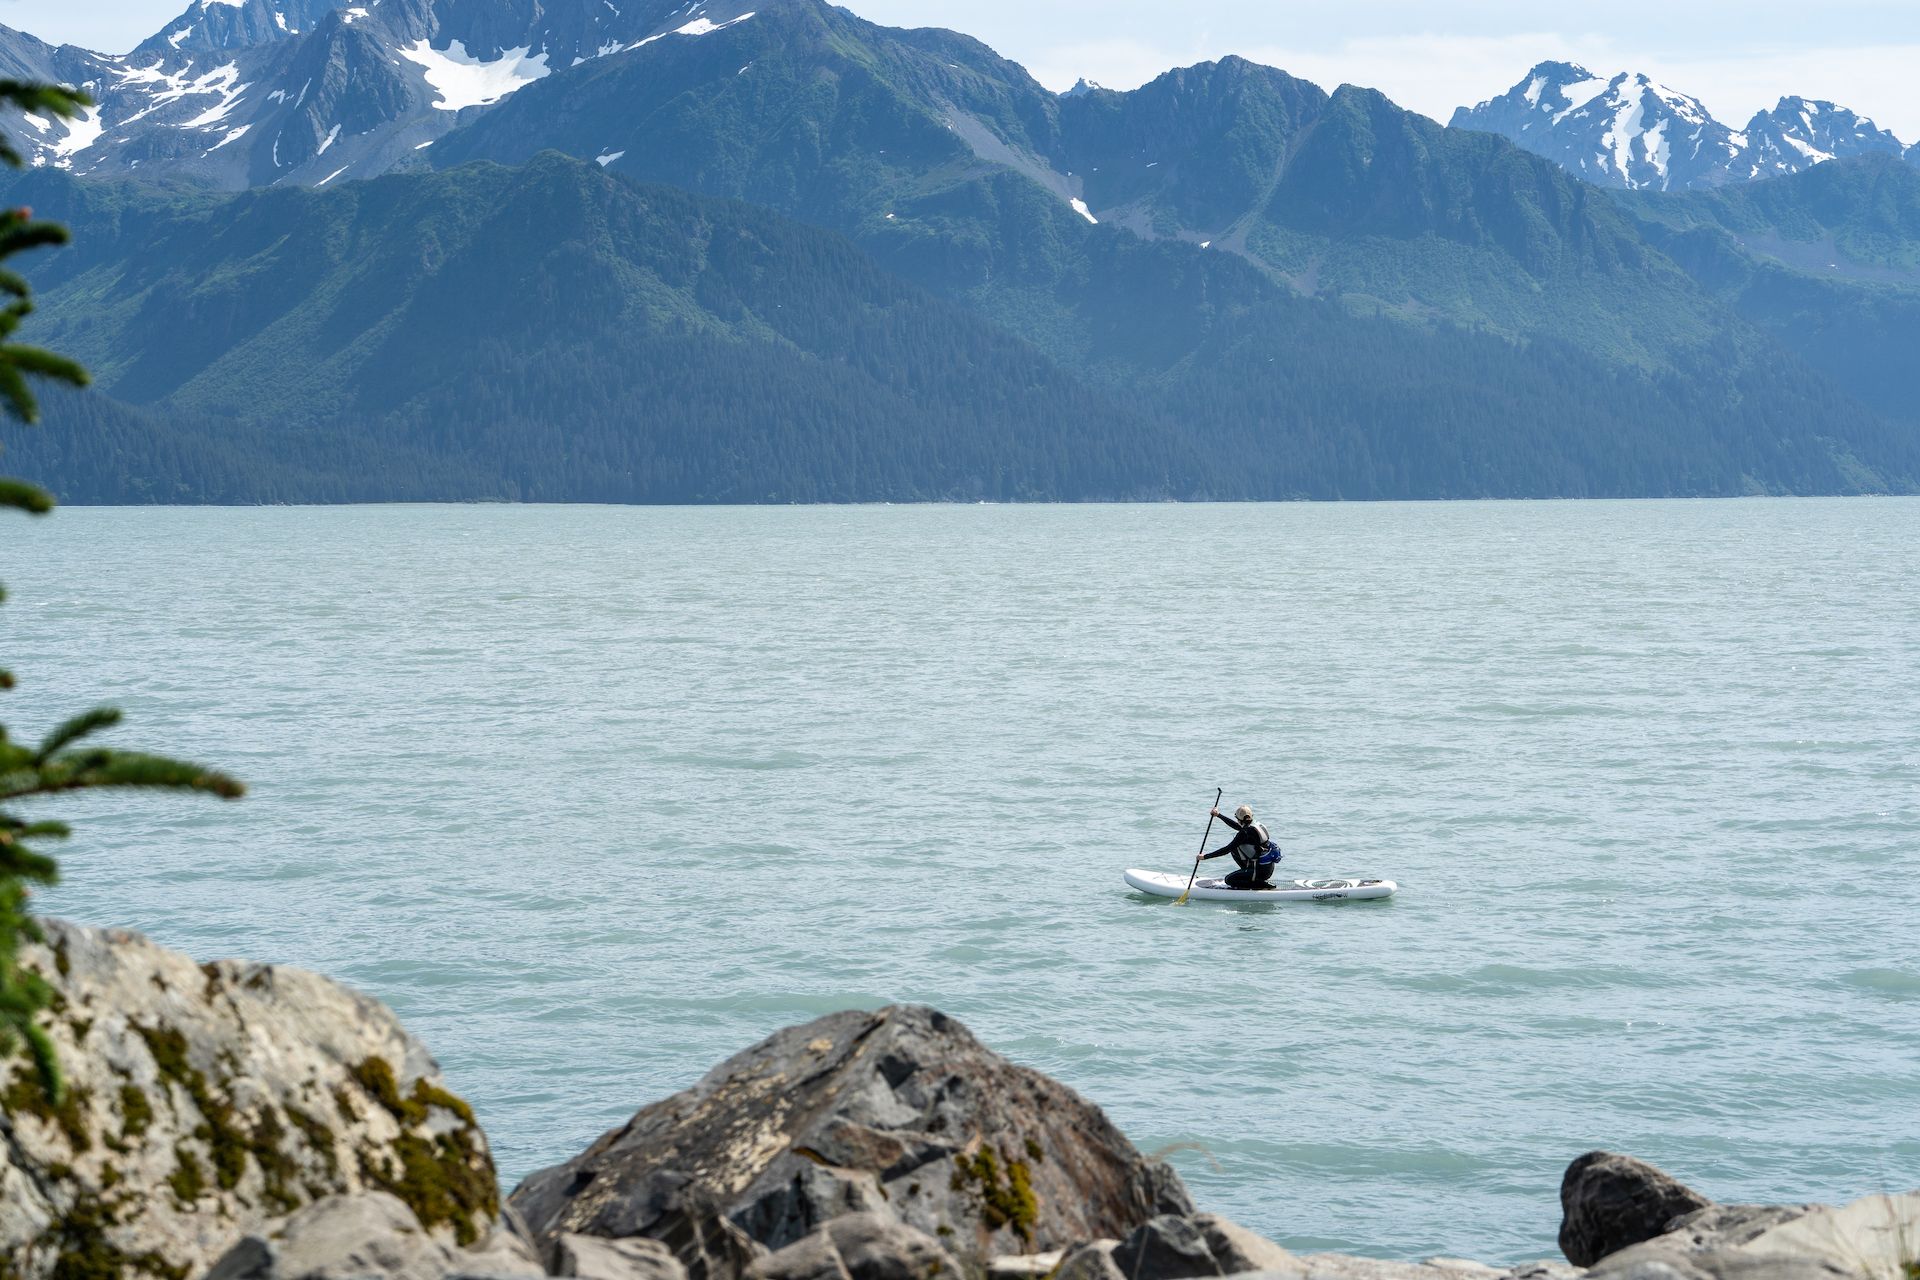 A paddle boarder enjoying the calm water of Resurrection Bay